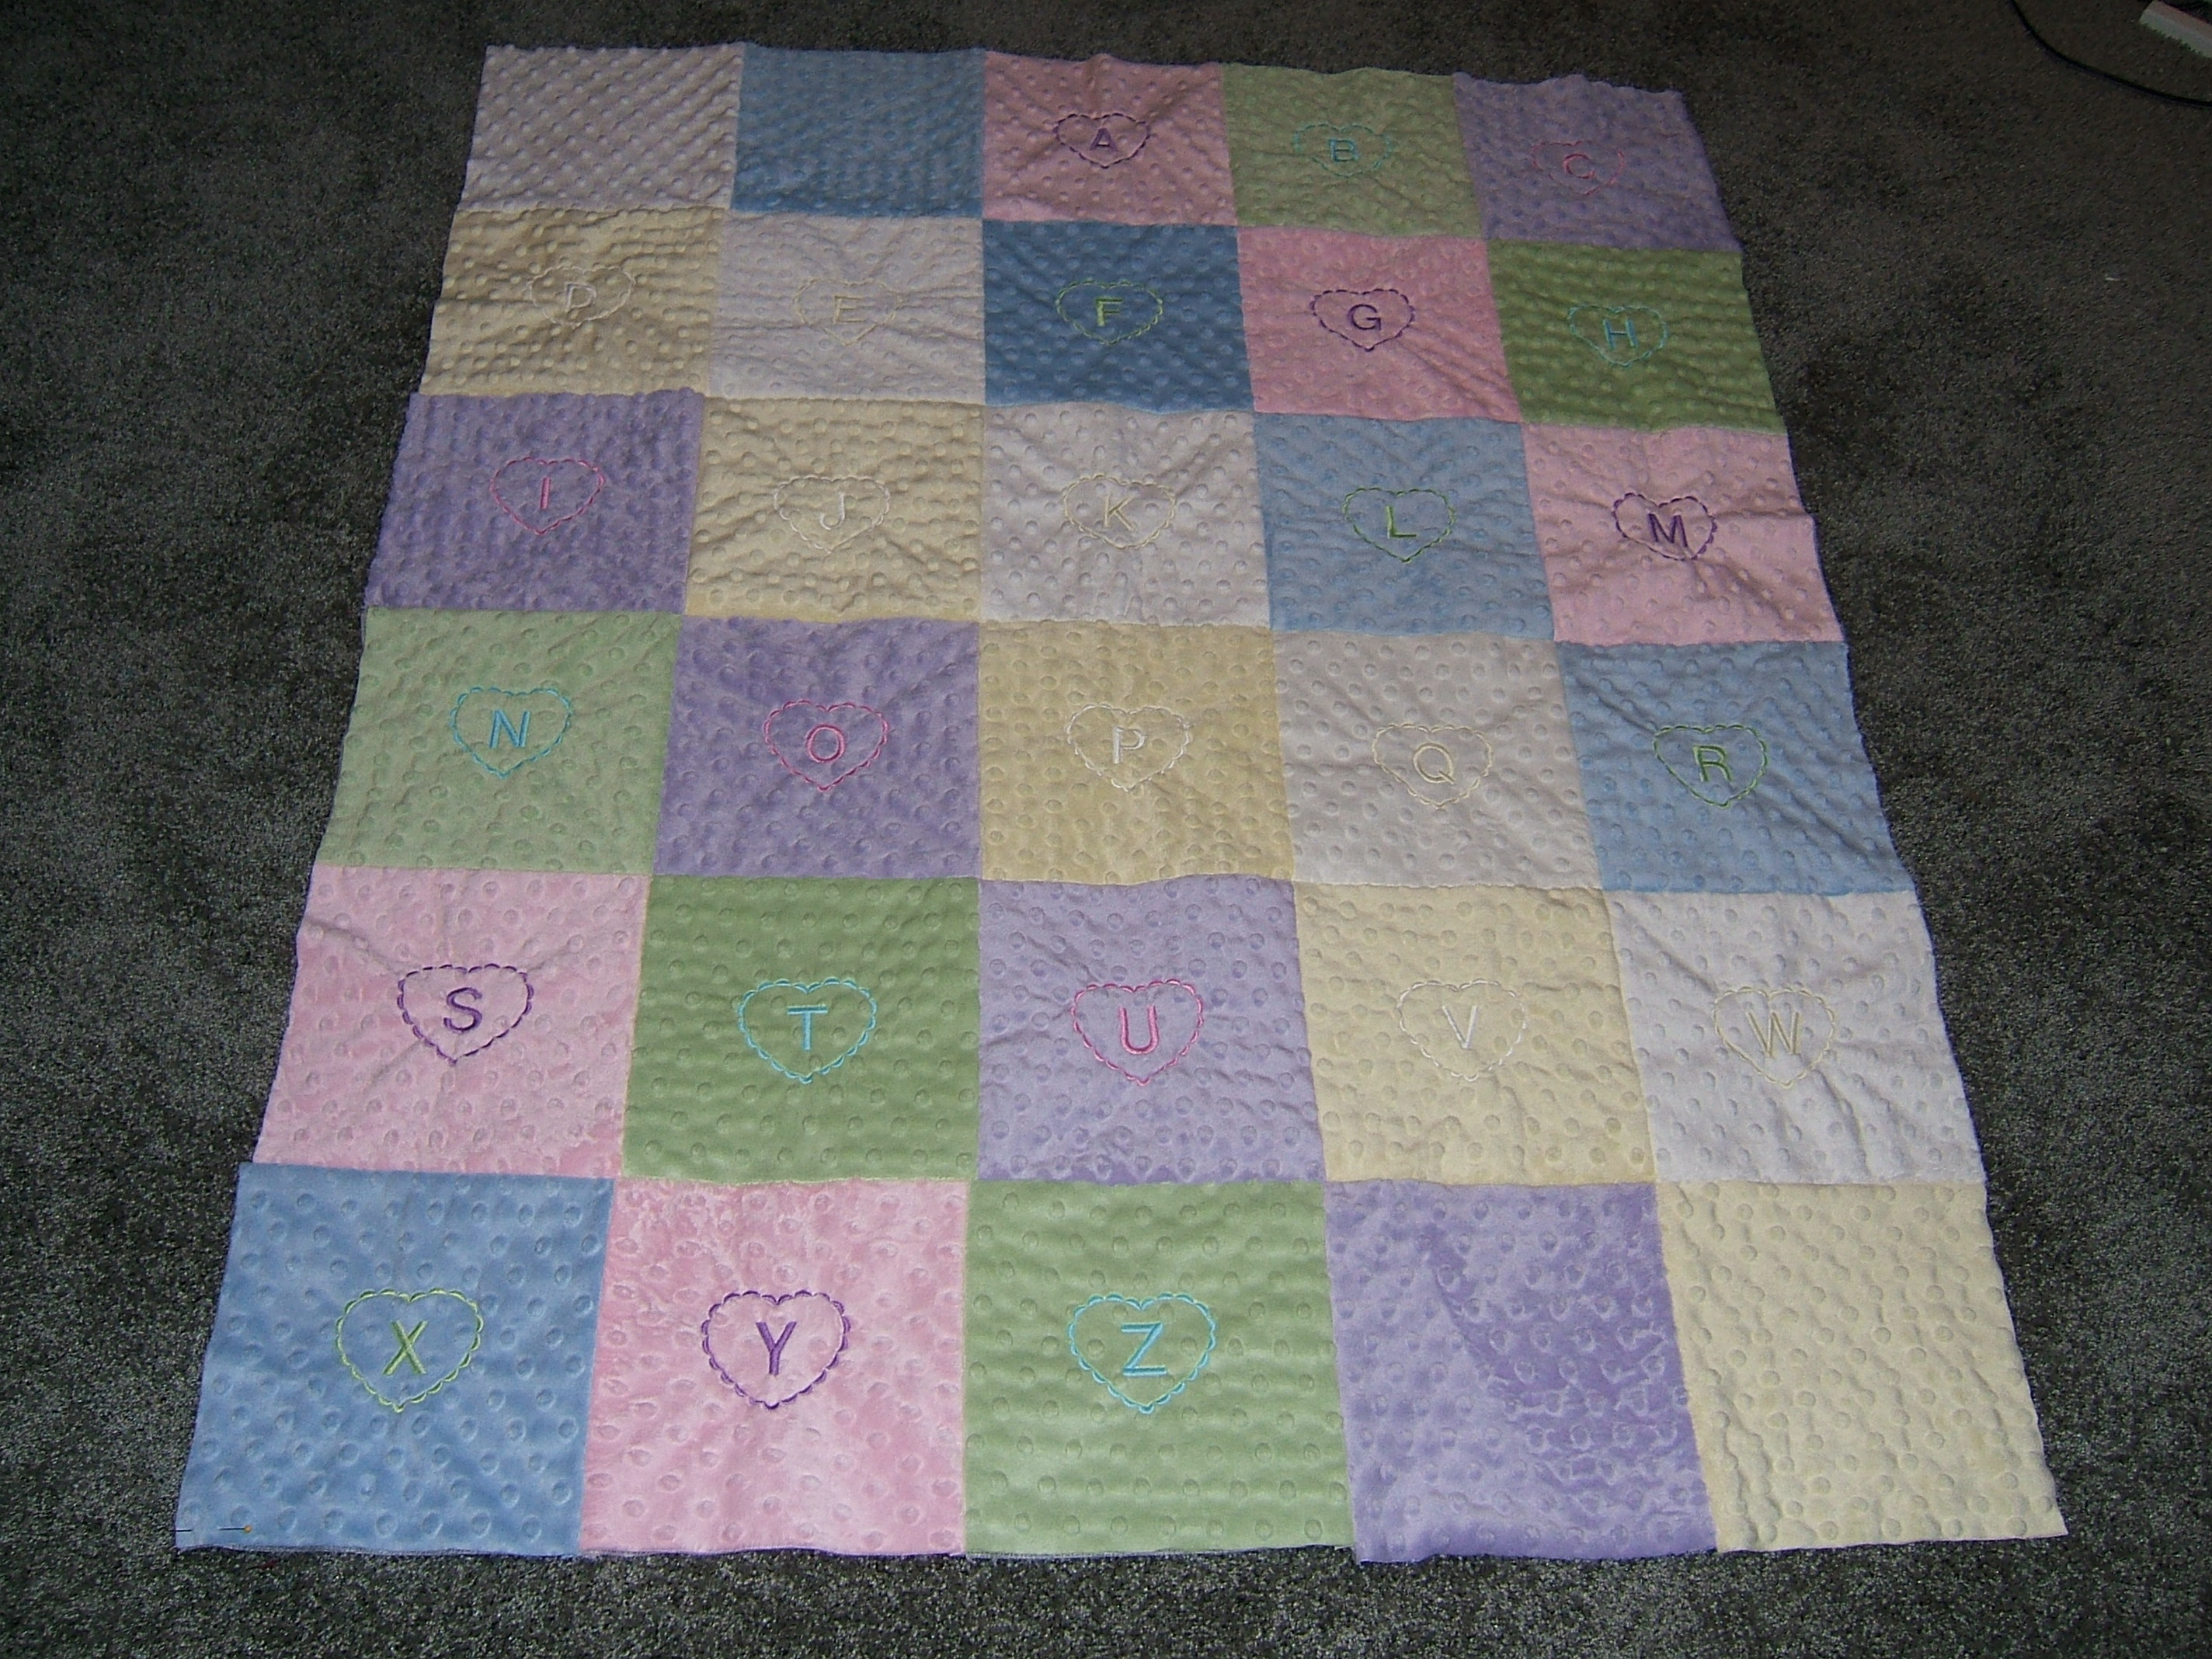 Baby Rooms by Nana, Mary Seibolt, Custom Embroidery and Quilting